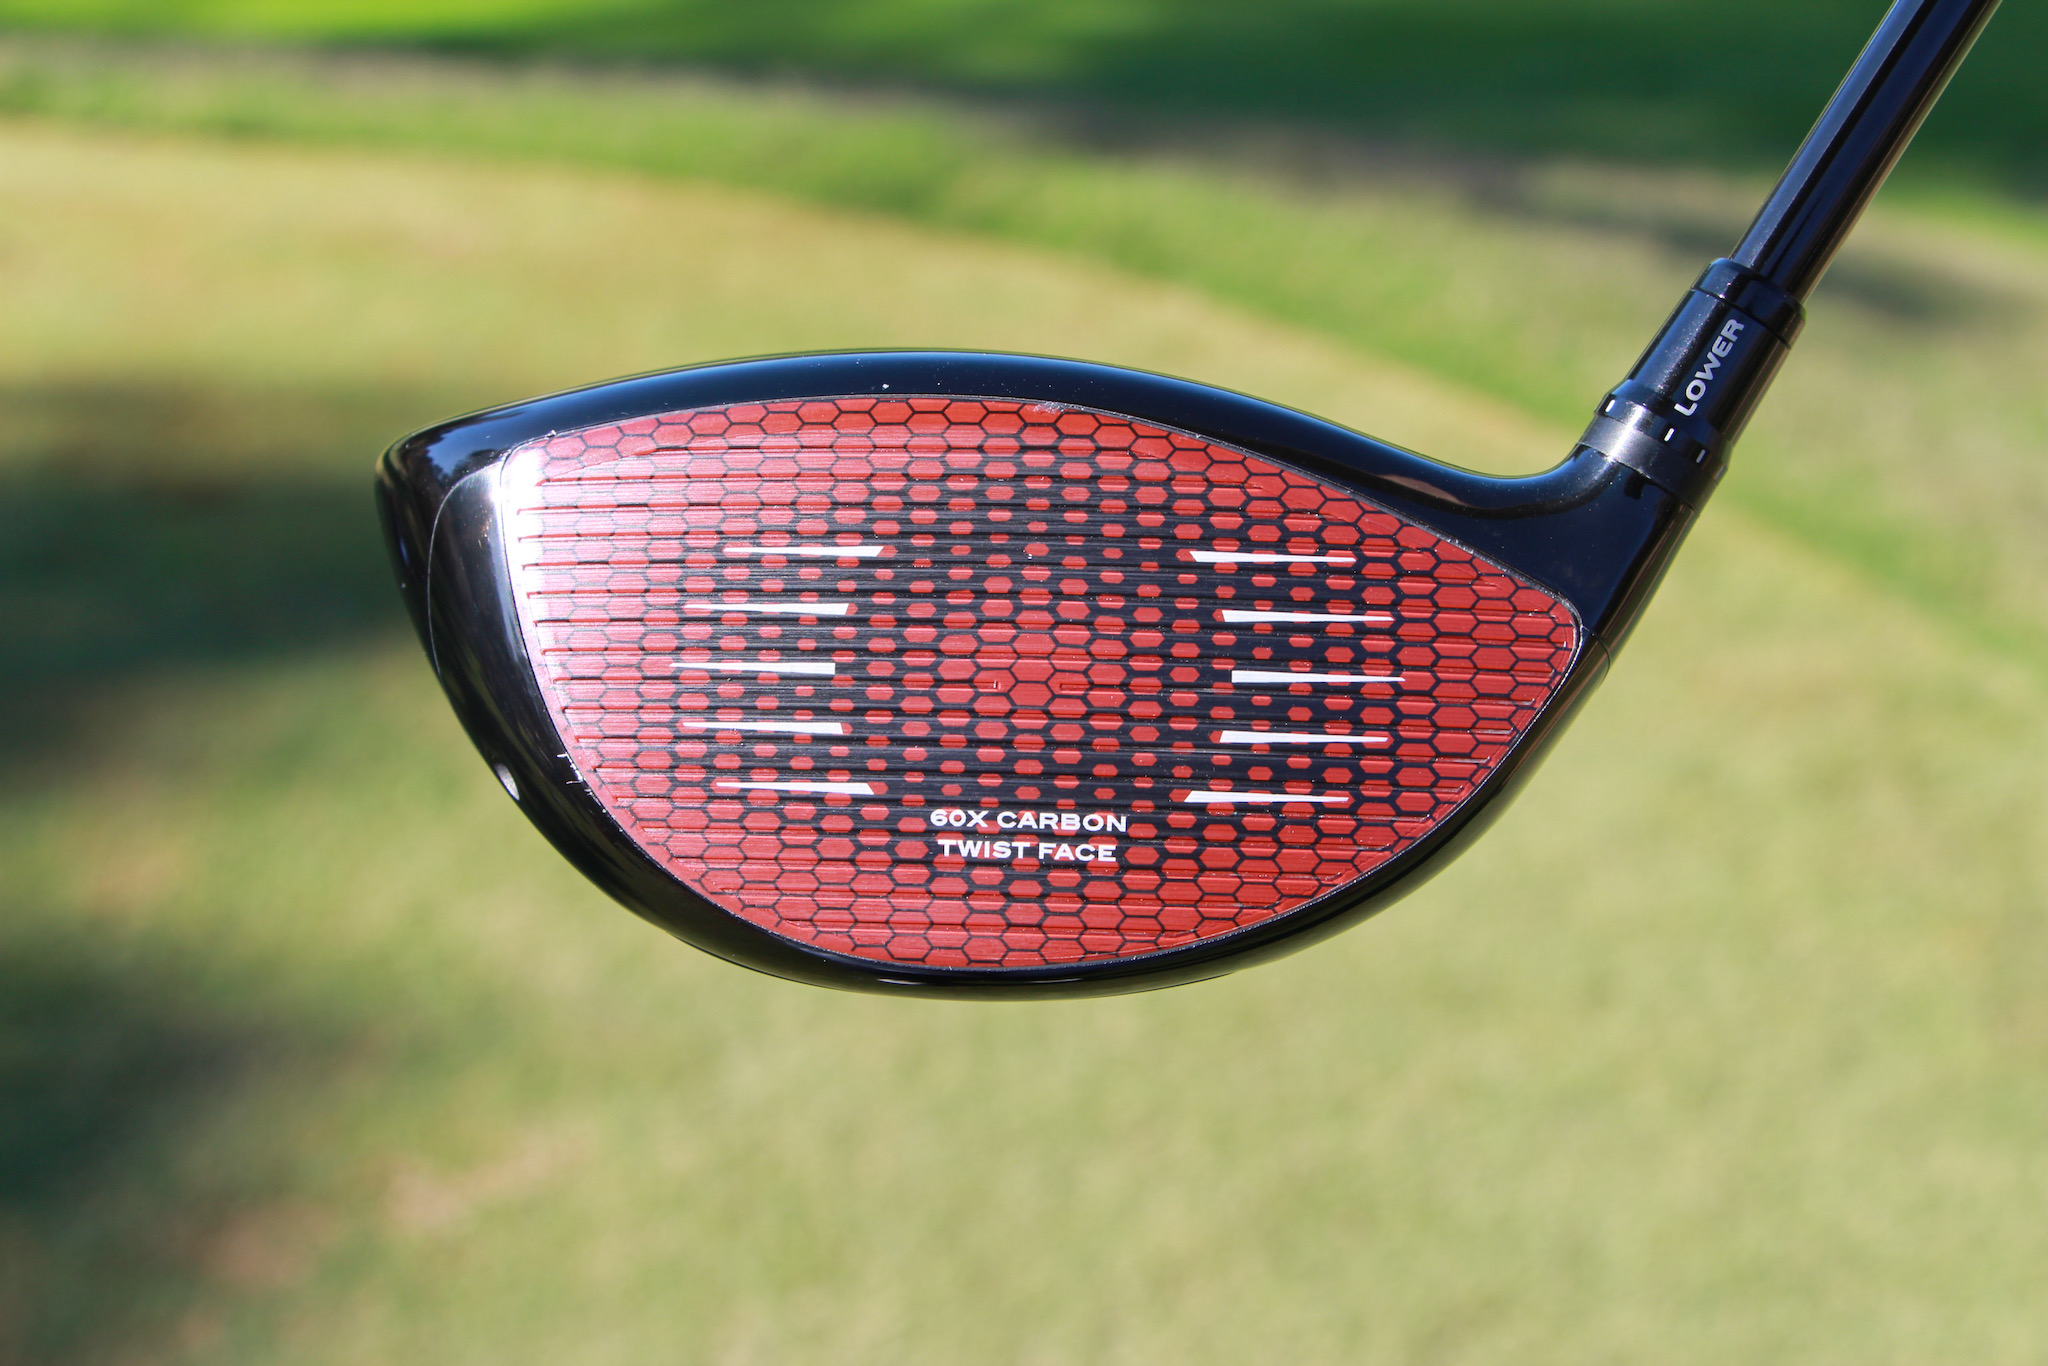 TaylorMade Stealth HD driver: Face